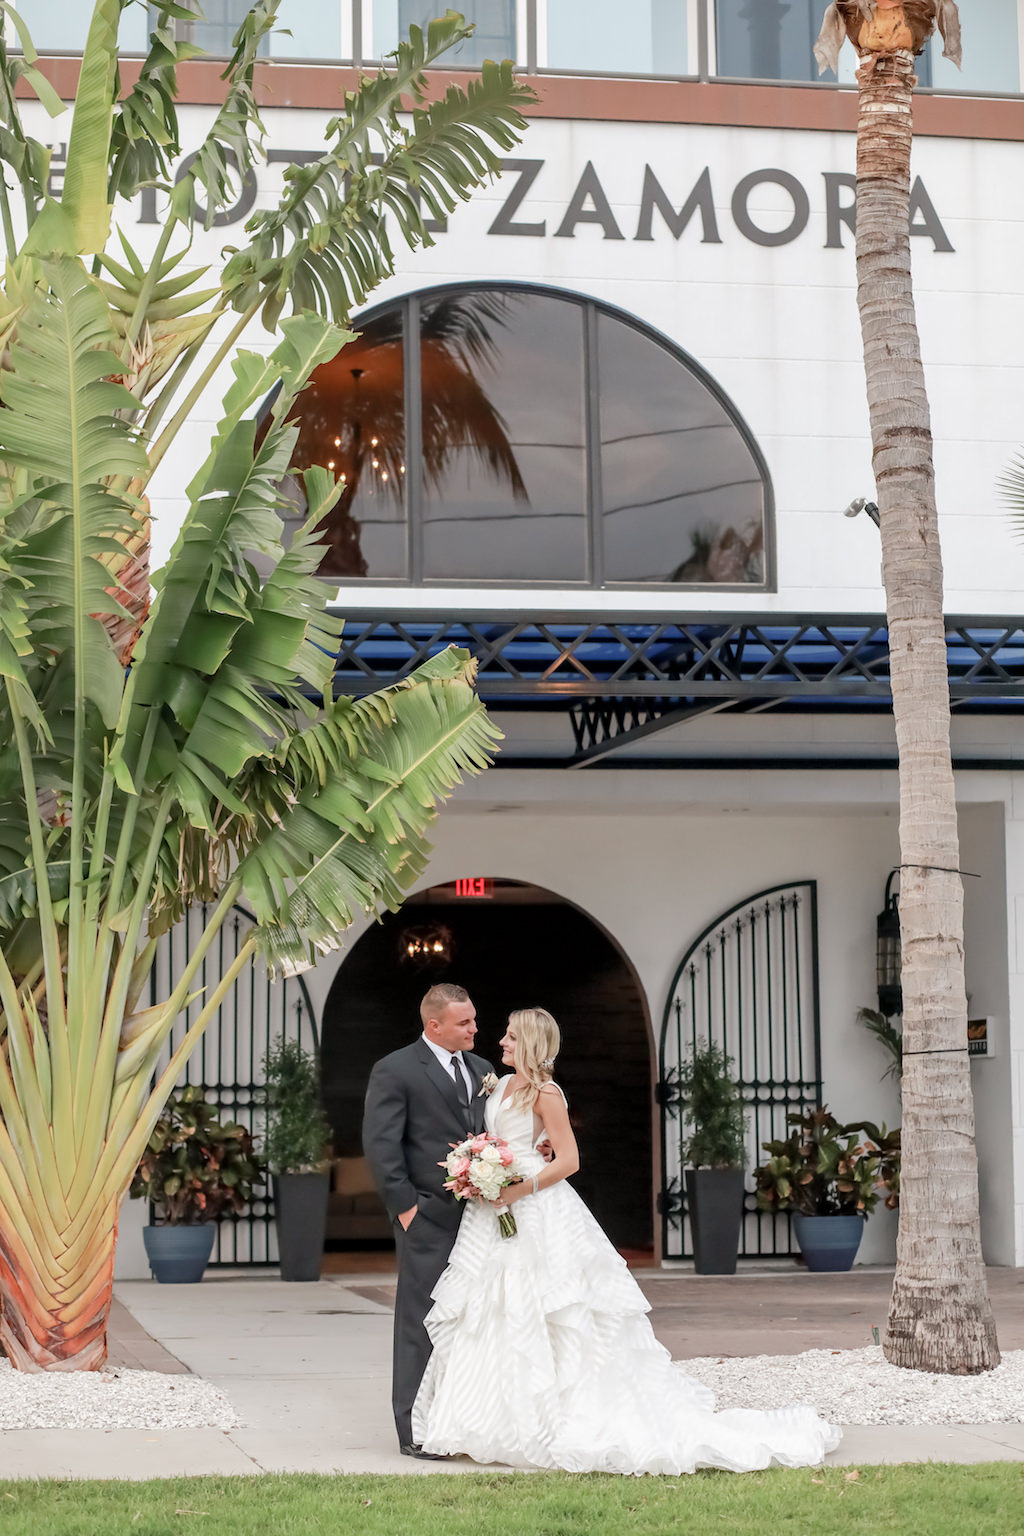 Florida Bride and Groom Wedding Portrait Out Front of St. Pete Beach Wedding Venue Hotel Zamora | Tampa Bay Wedding Photographer Lifelong Photography Studios | Wedding Dress Shop Truly Forever Bridal